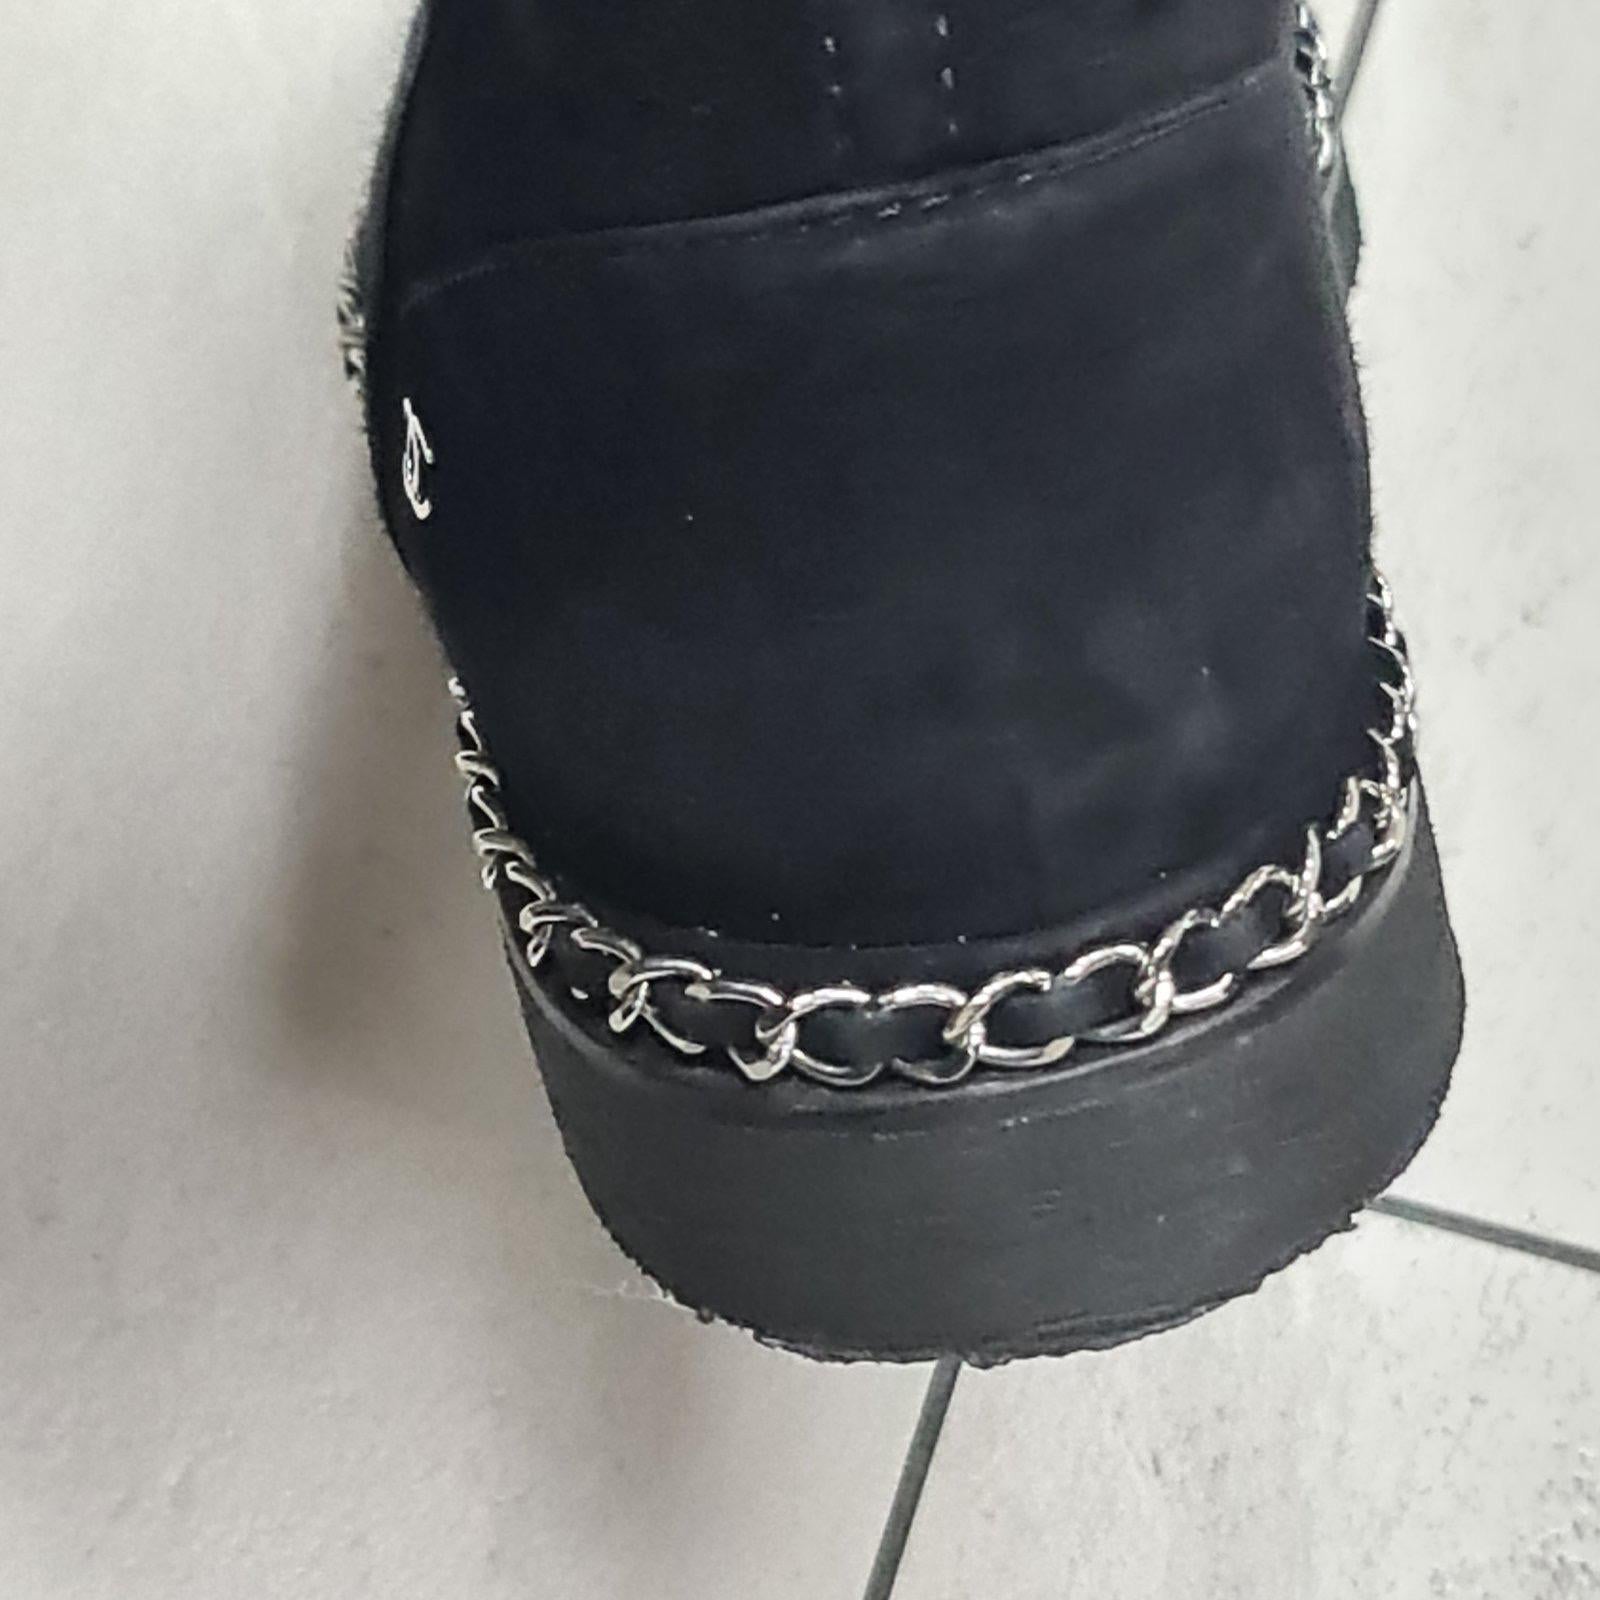 Chanel Black Suede Chain Detail Ankle Boots In Good Condition For Sale In Krakow, PL